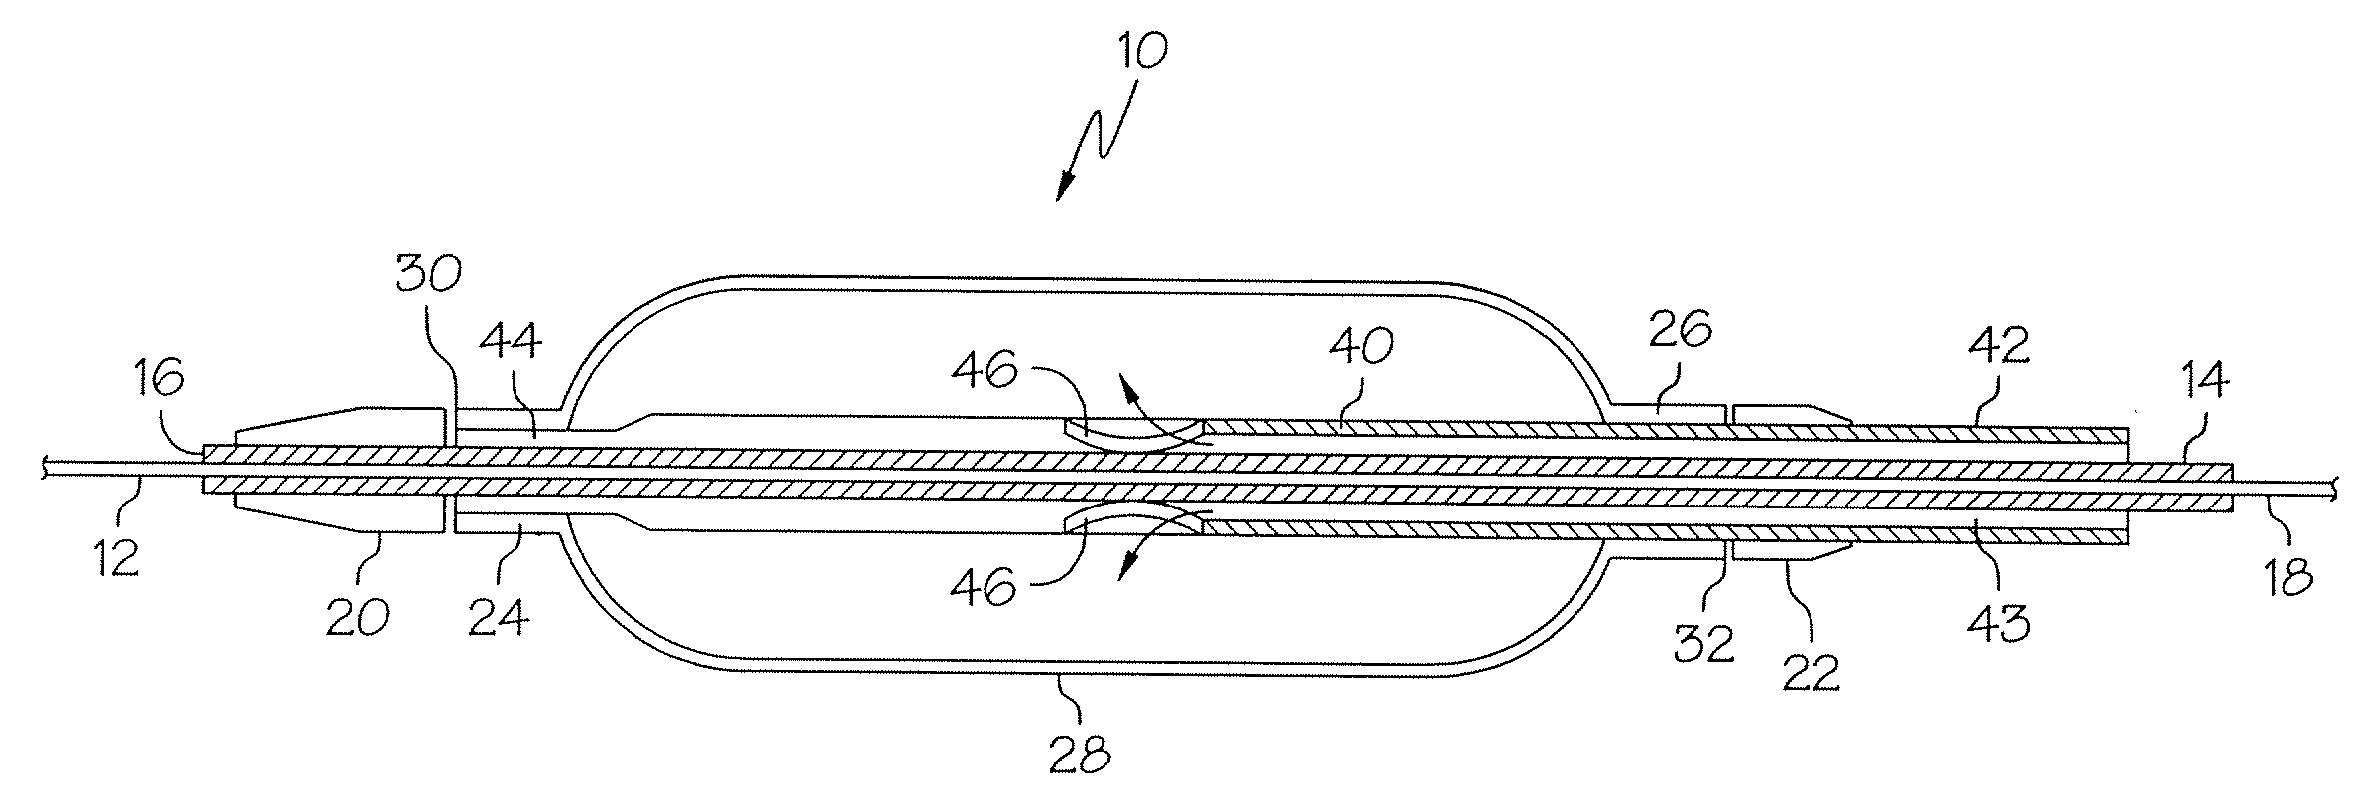 Rotating stent system for side branch access and protection and method of using same